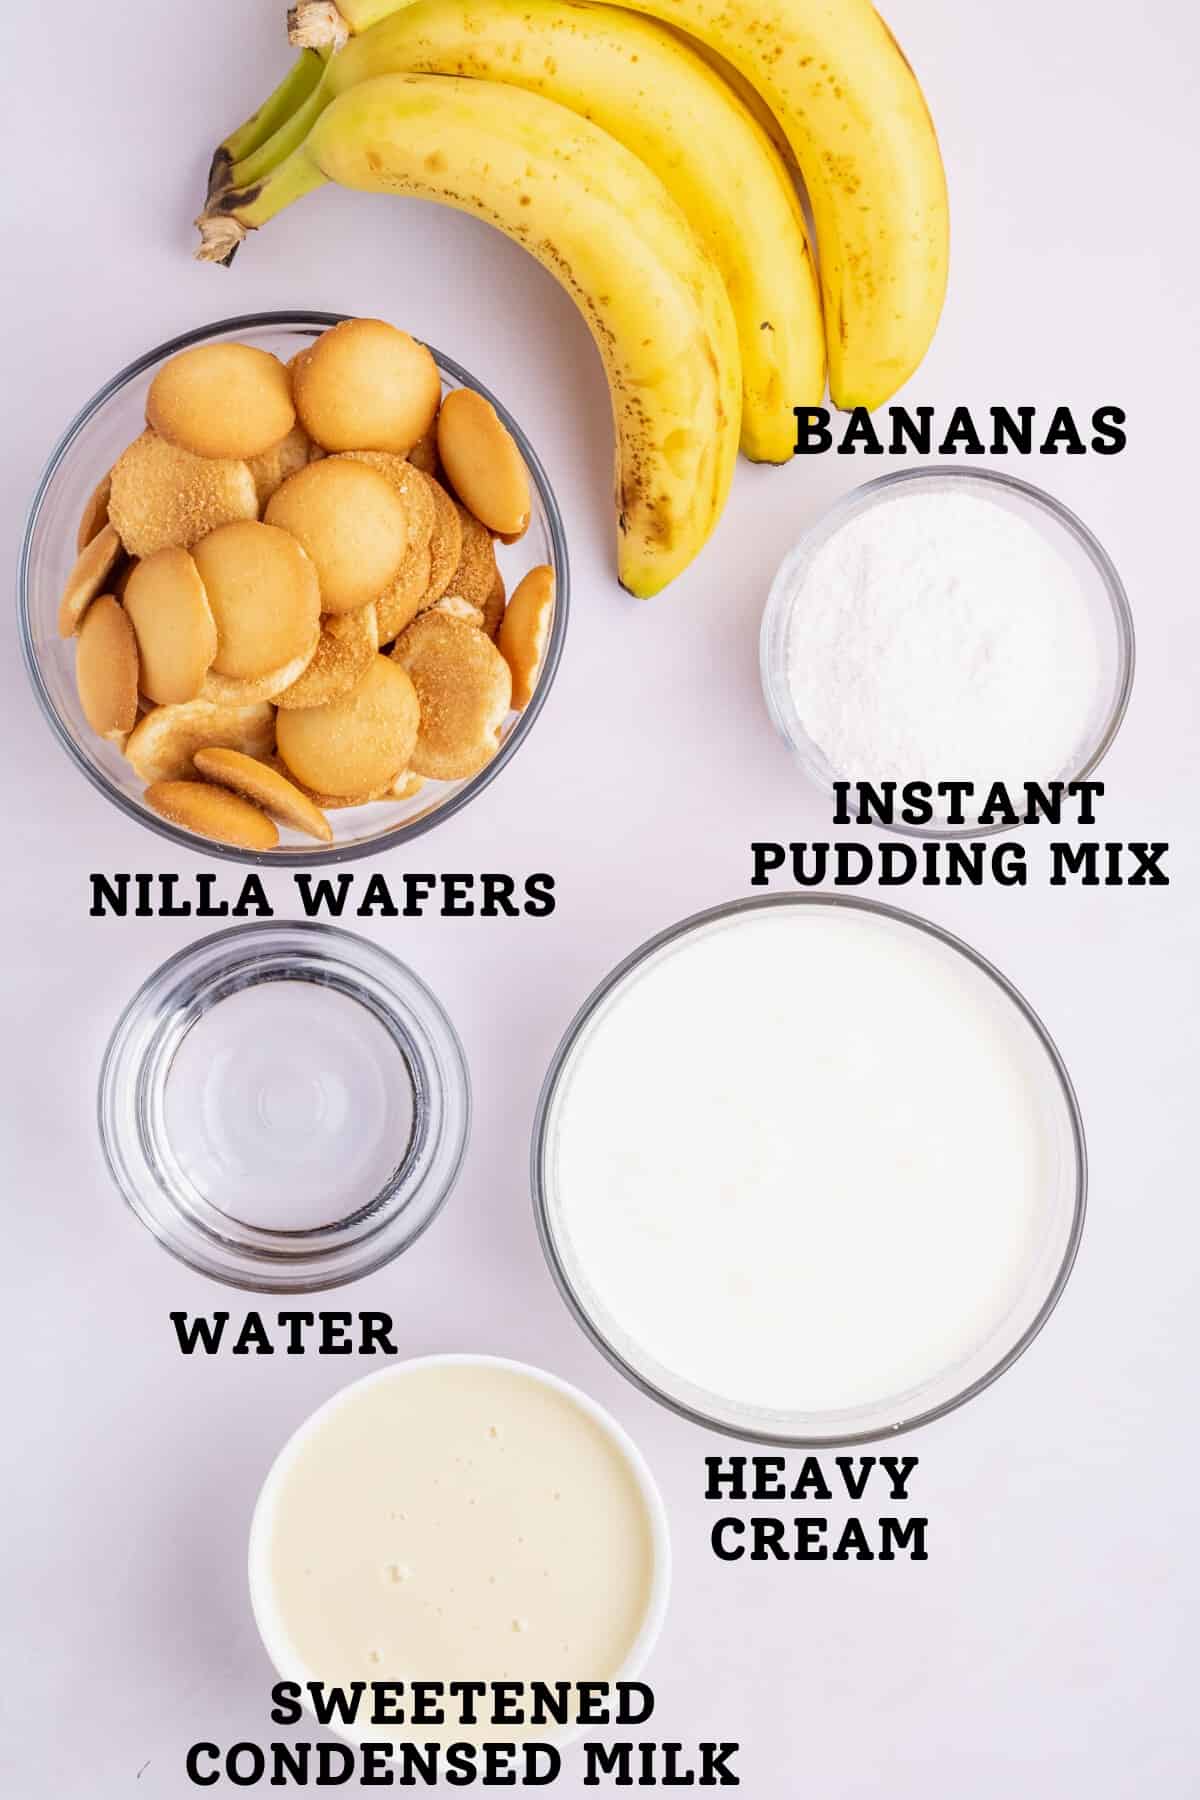 A labeled image of ingredients needed to make Magnolia Bakery Banana Pudding.